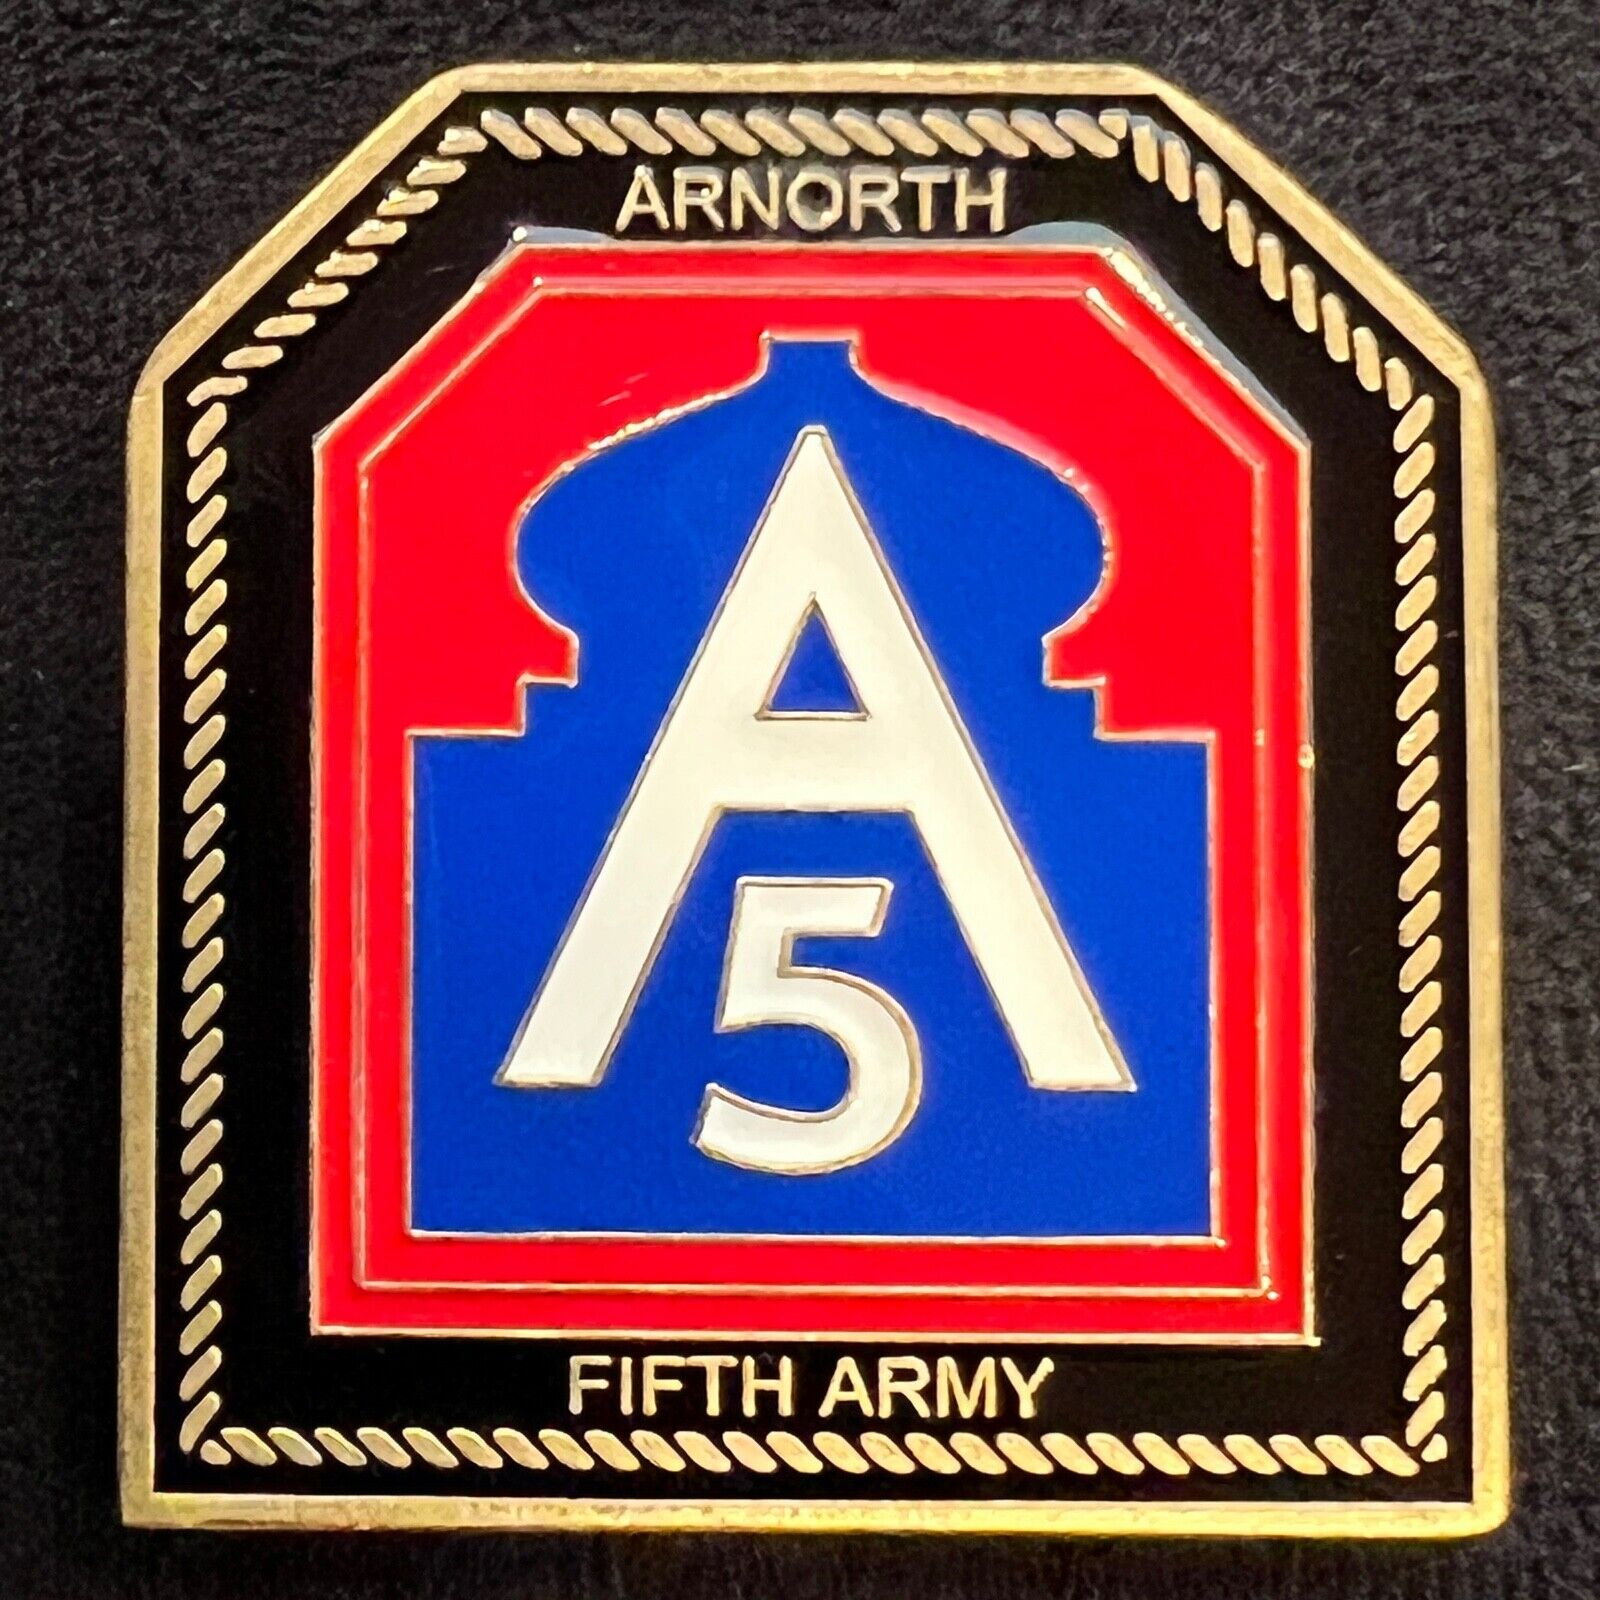 Fifth Army ARNORTH Chief of Staff Challenge Coin